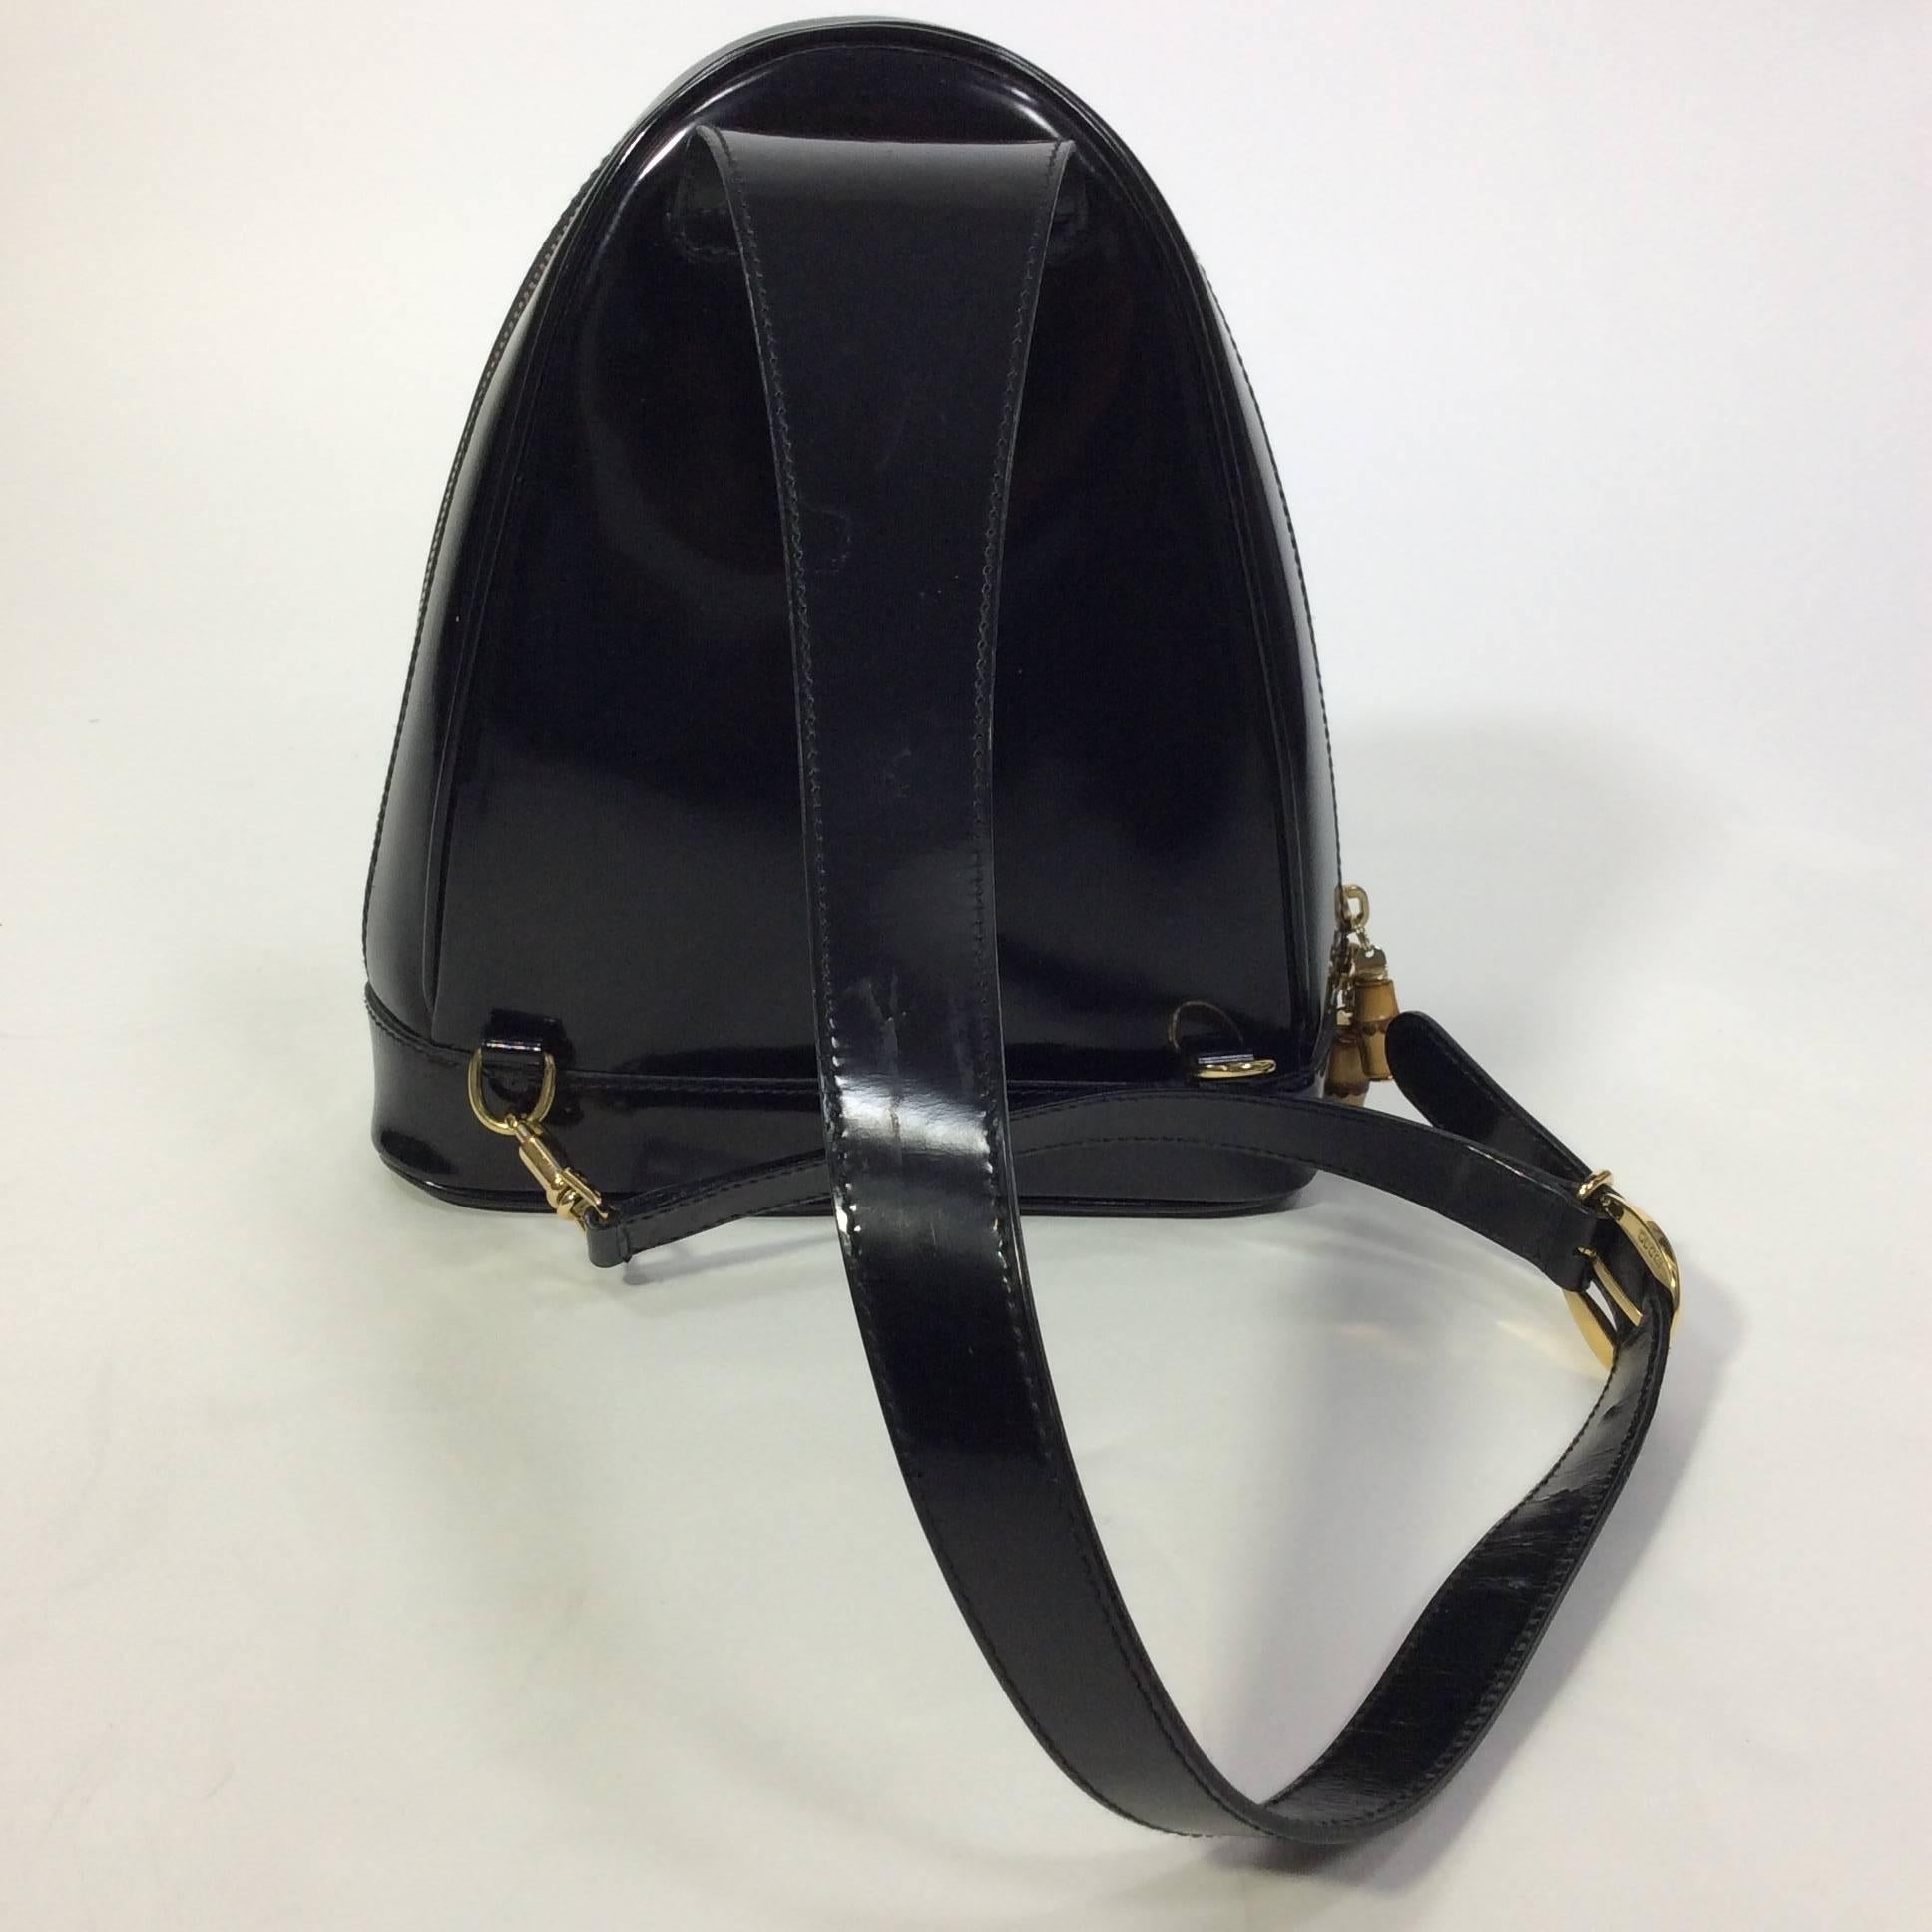 Gucci Black High Polished Leather Sling Bag from the 80's in amazing overall condition. The bag is leather lined with bamboo zipper closures and includes the original dustbag. The sling shoulder strap is 32" in length and adjustable to either